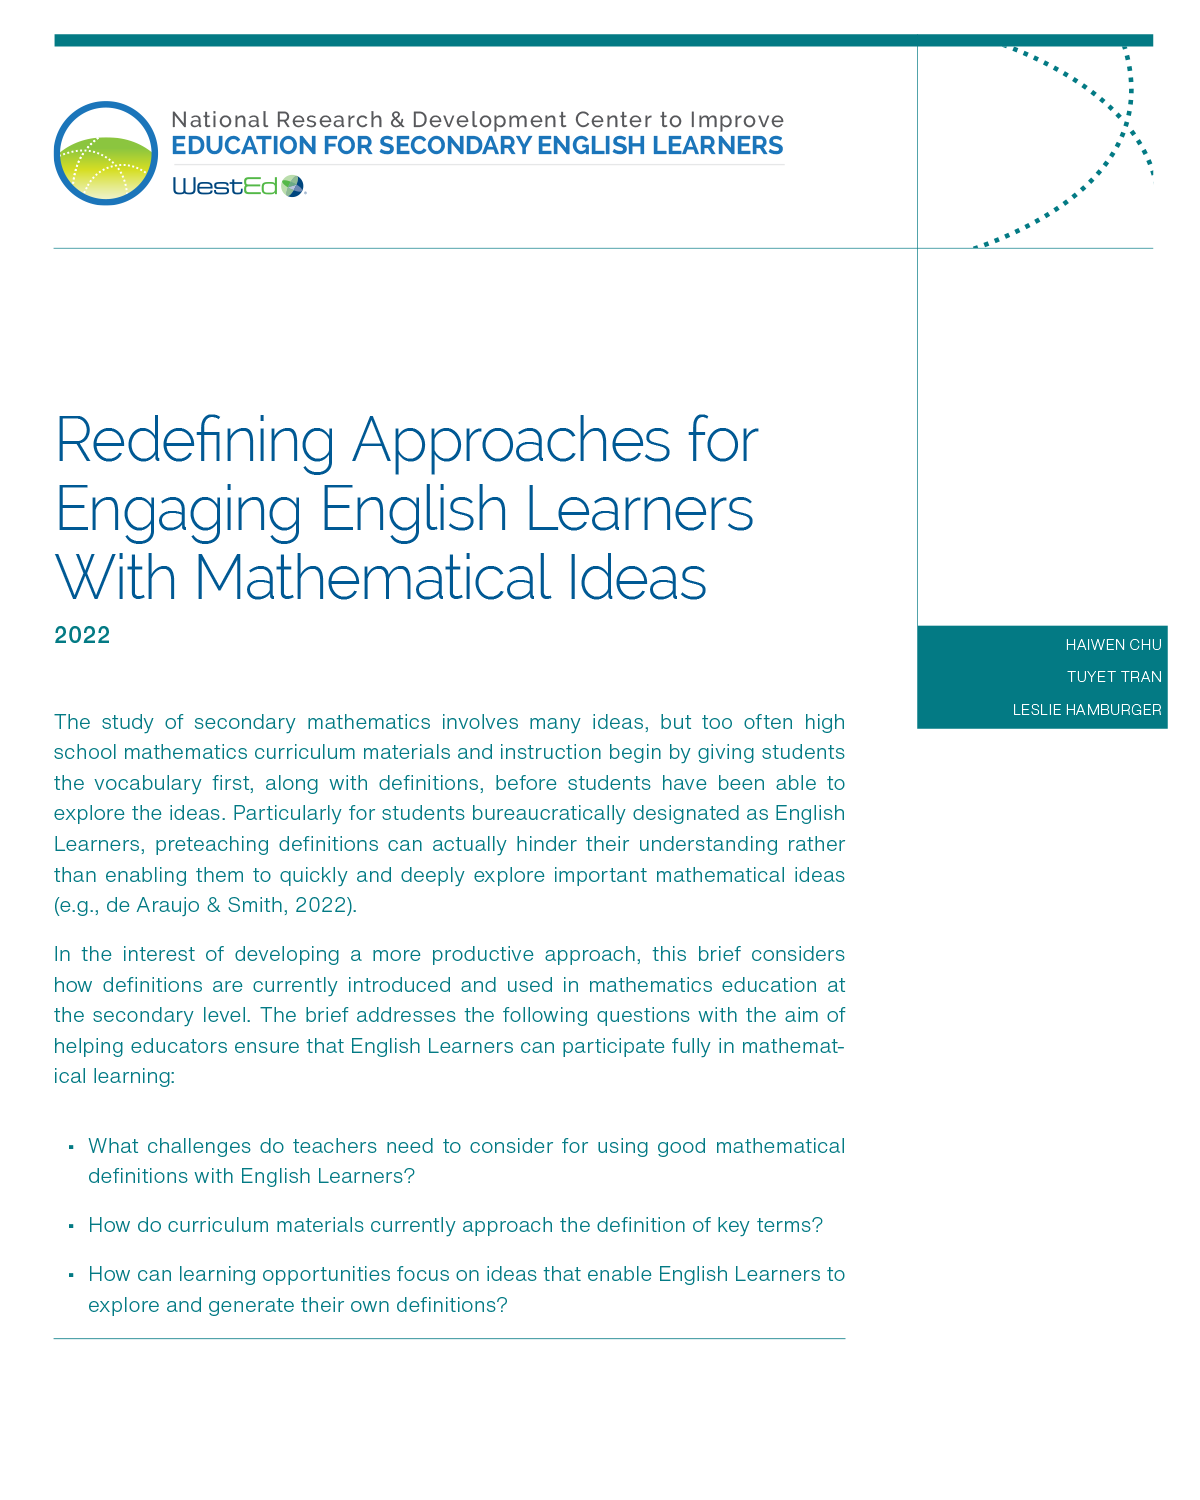 Redefining Approaches for Engaging English Learners With Mathematicians Ideas